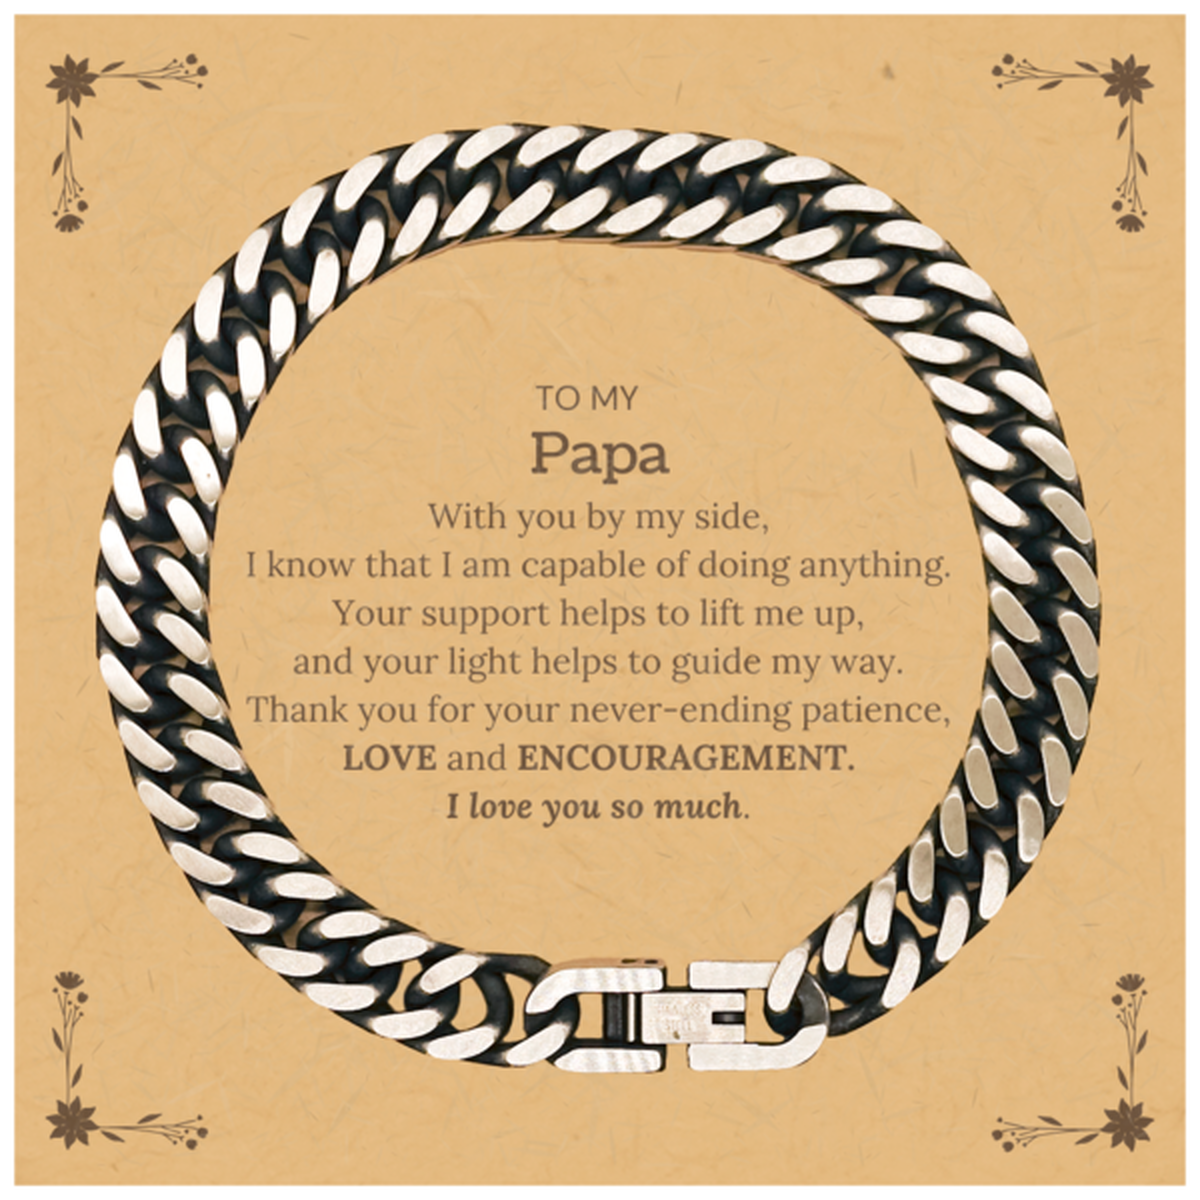 Appreciation Papa Cuban Link Chain Bracelet Gifts, To My Papa Birthday Christmas Wedding Keepsake Gifts for Papa With you by my side, I know that I am capable of doing anything. I love you so much